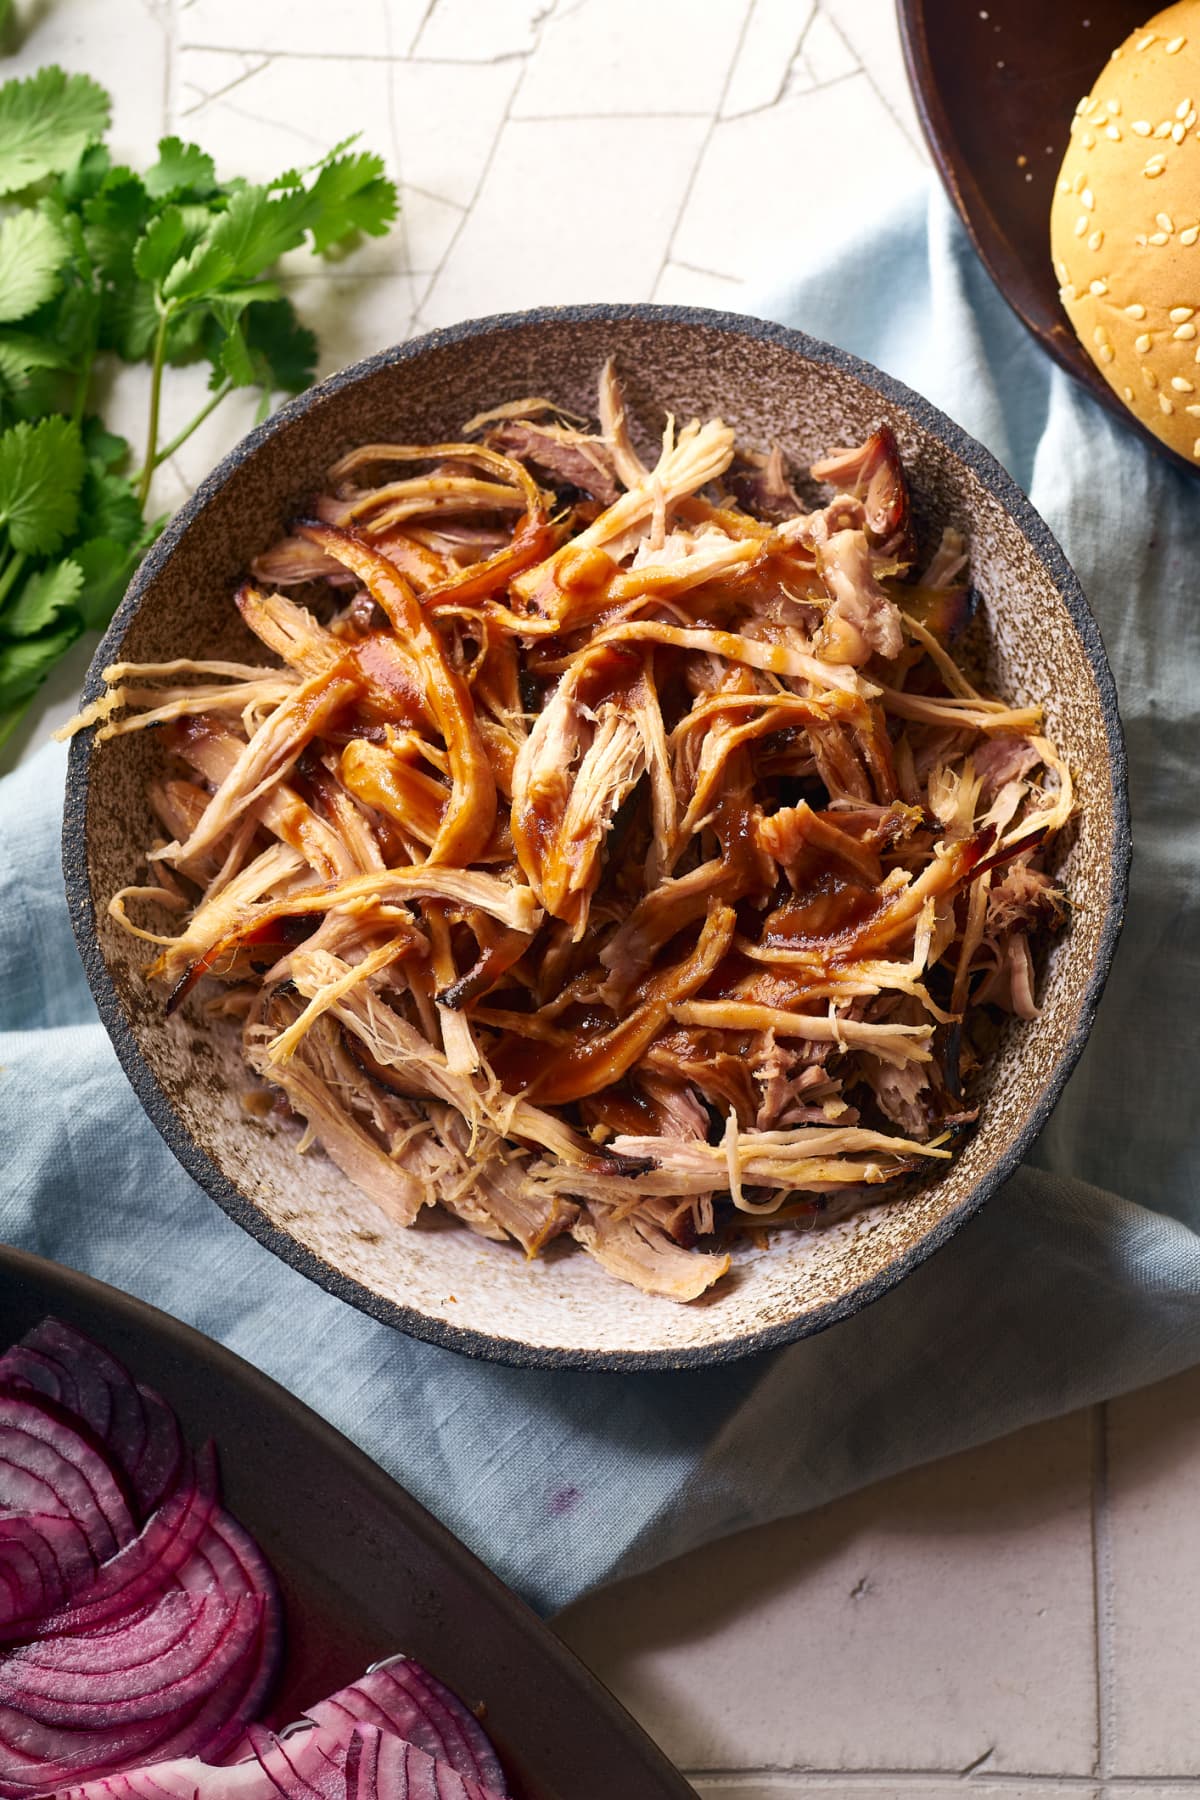 Flat lay with shredded pulled pork and barbecue sauce